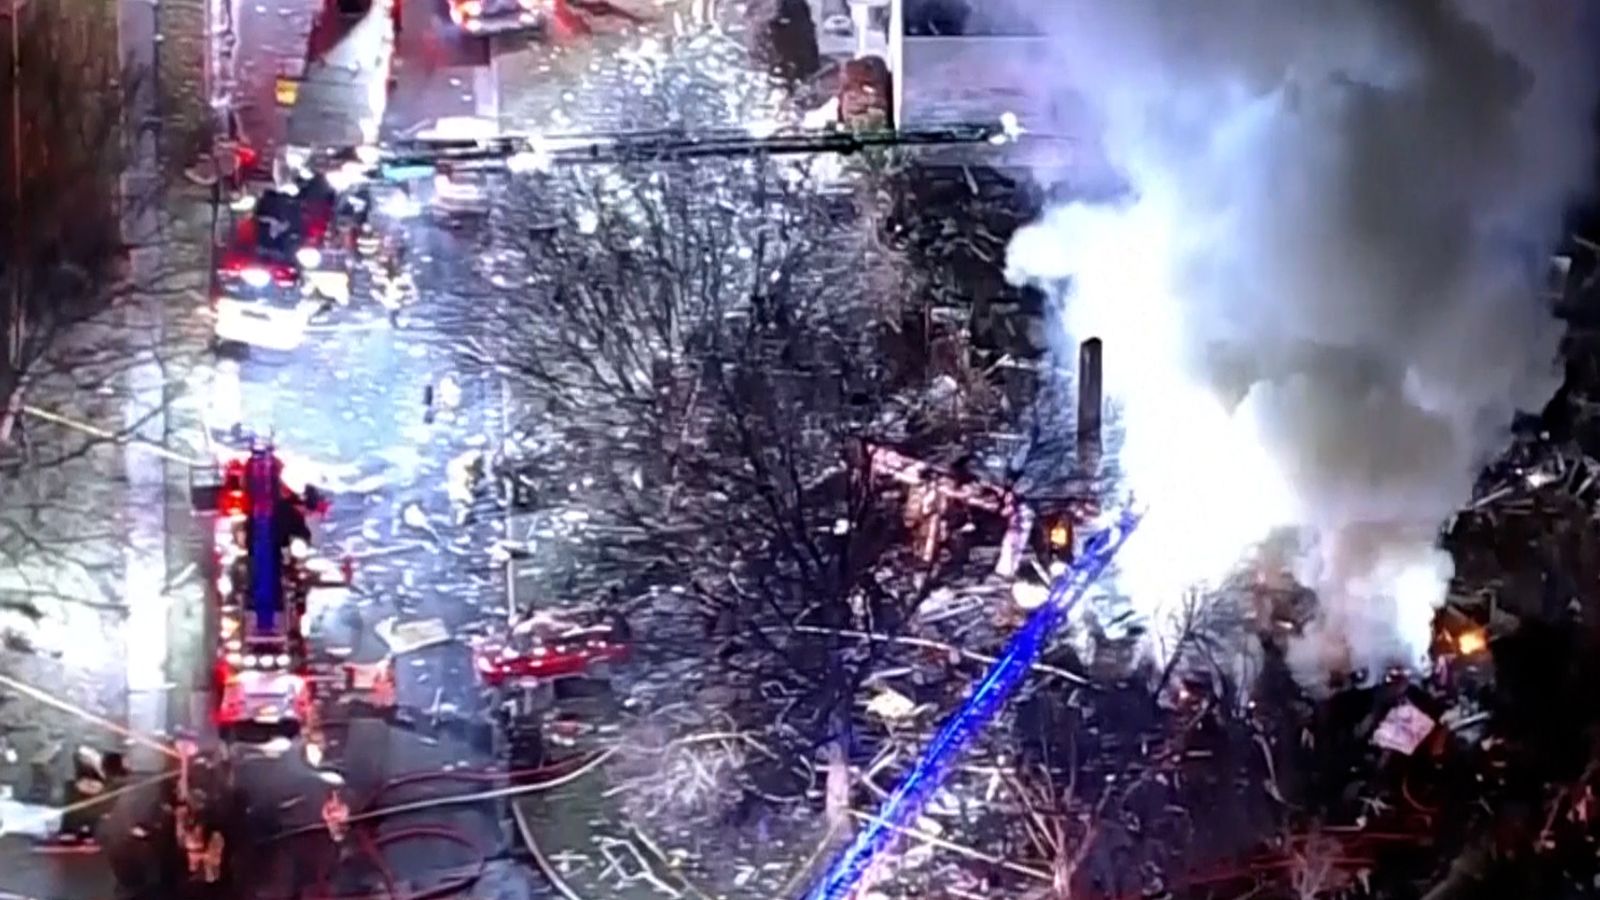 Virginia house explosion: Firefighter killed and 11 people injured, including two civilians